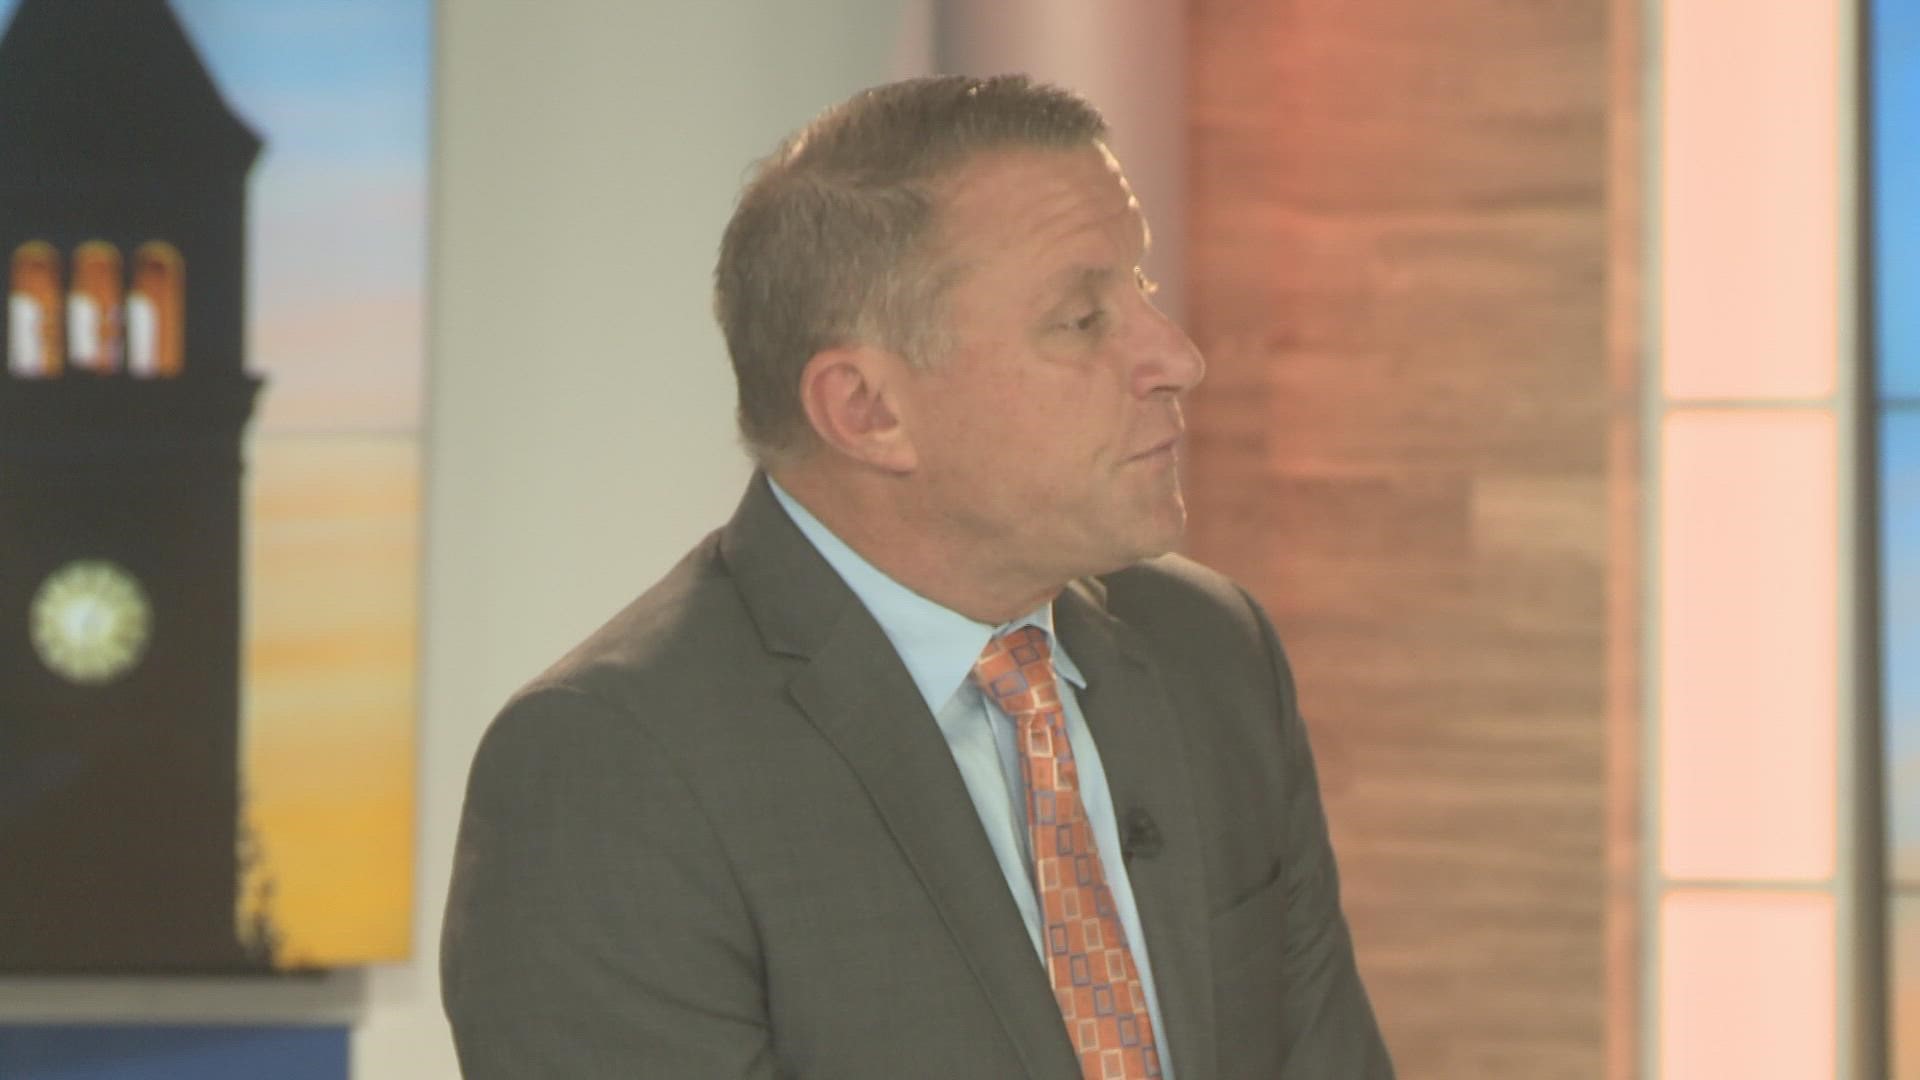 Central Valley School District Superintendent John Parker joined Up with KREM to talk about school safety and school priorities for the new school year.